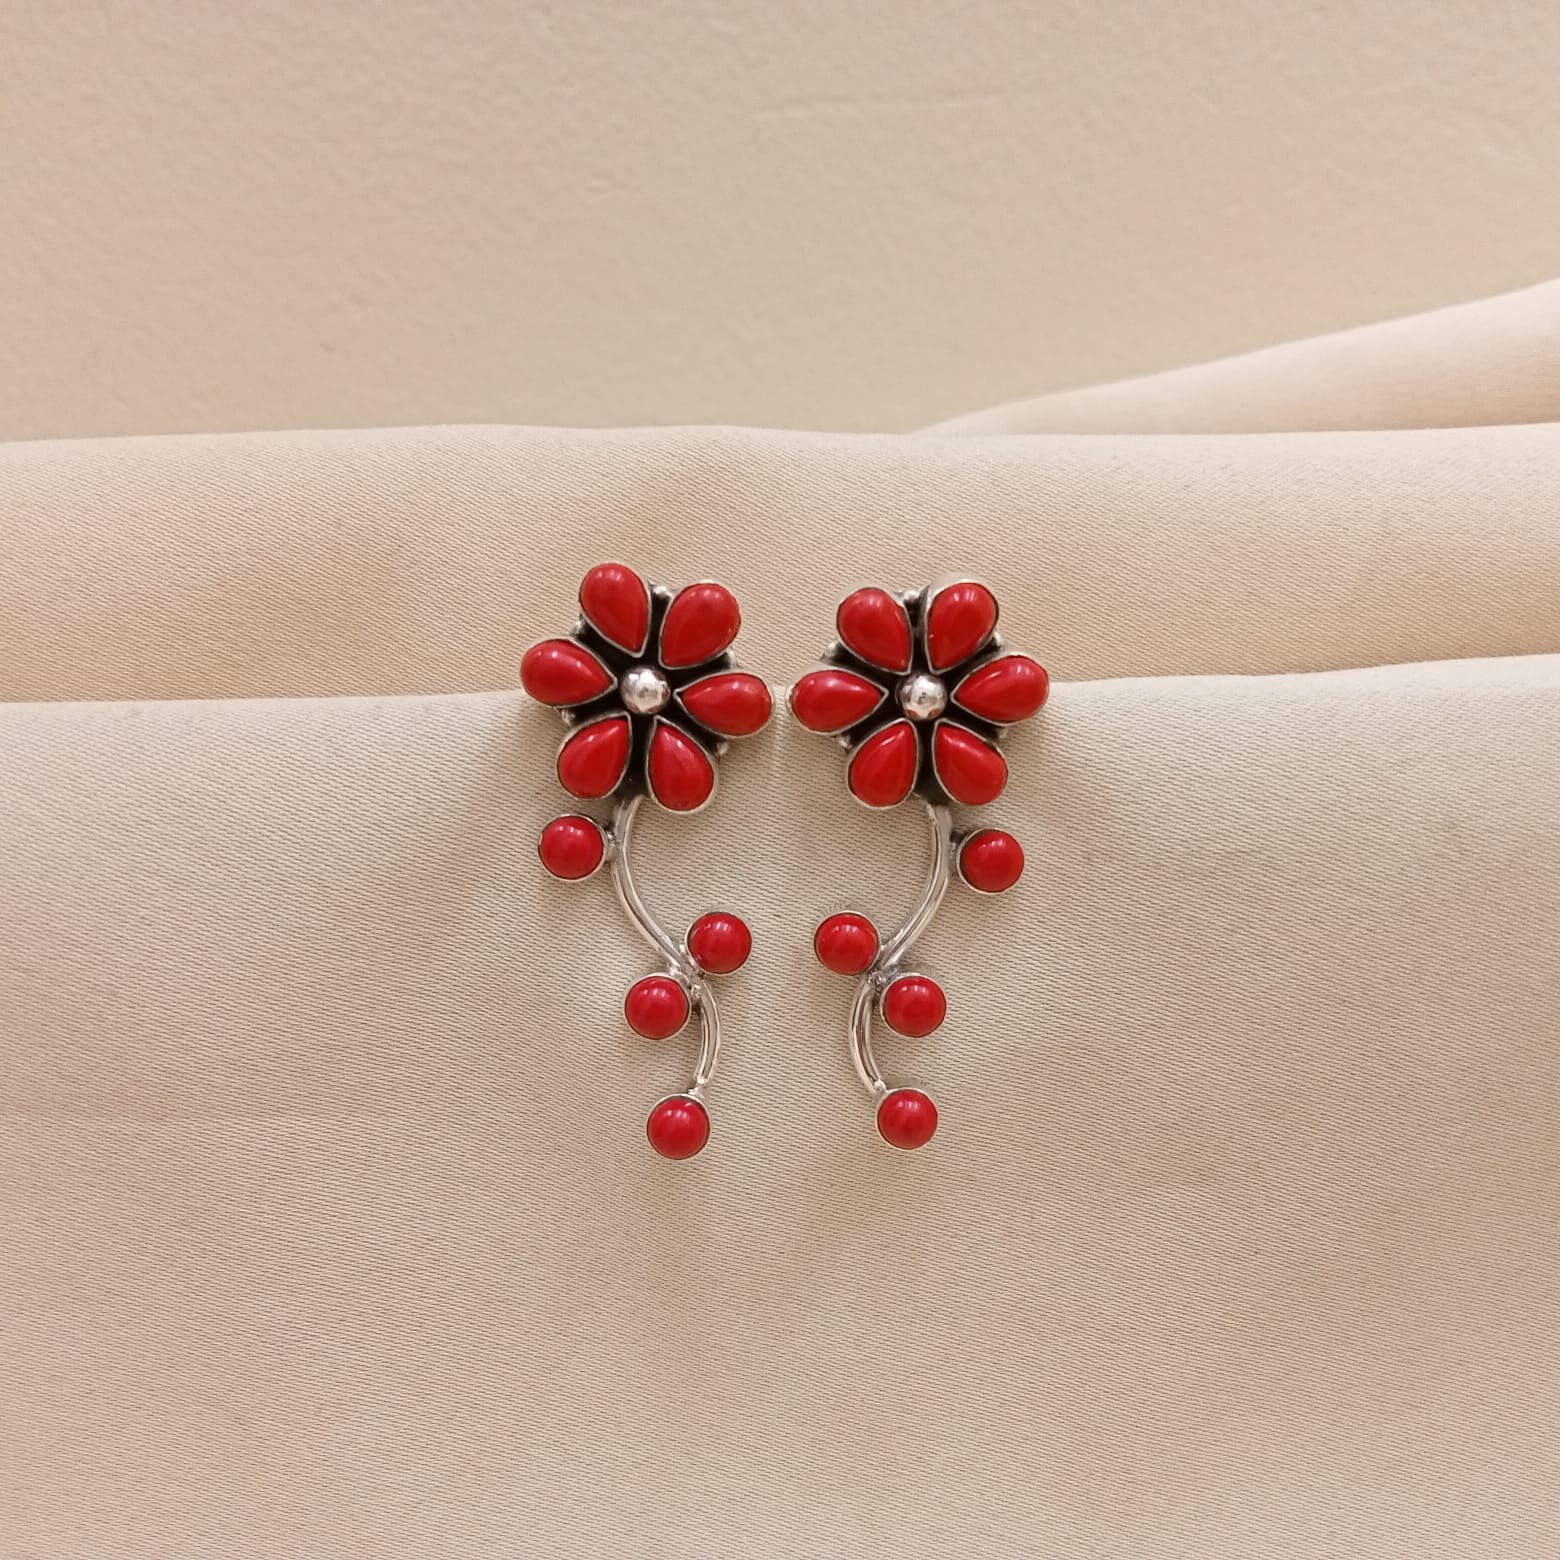 Floral Hydro Coral Earrings